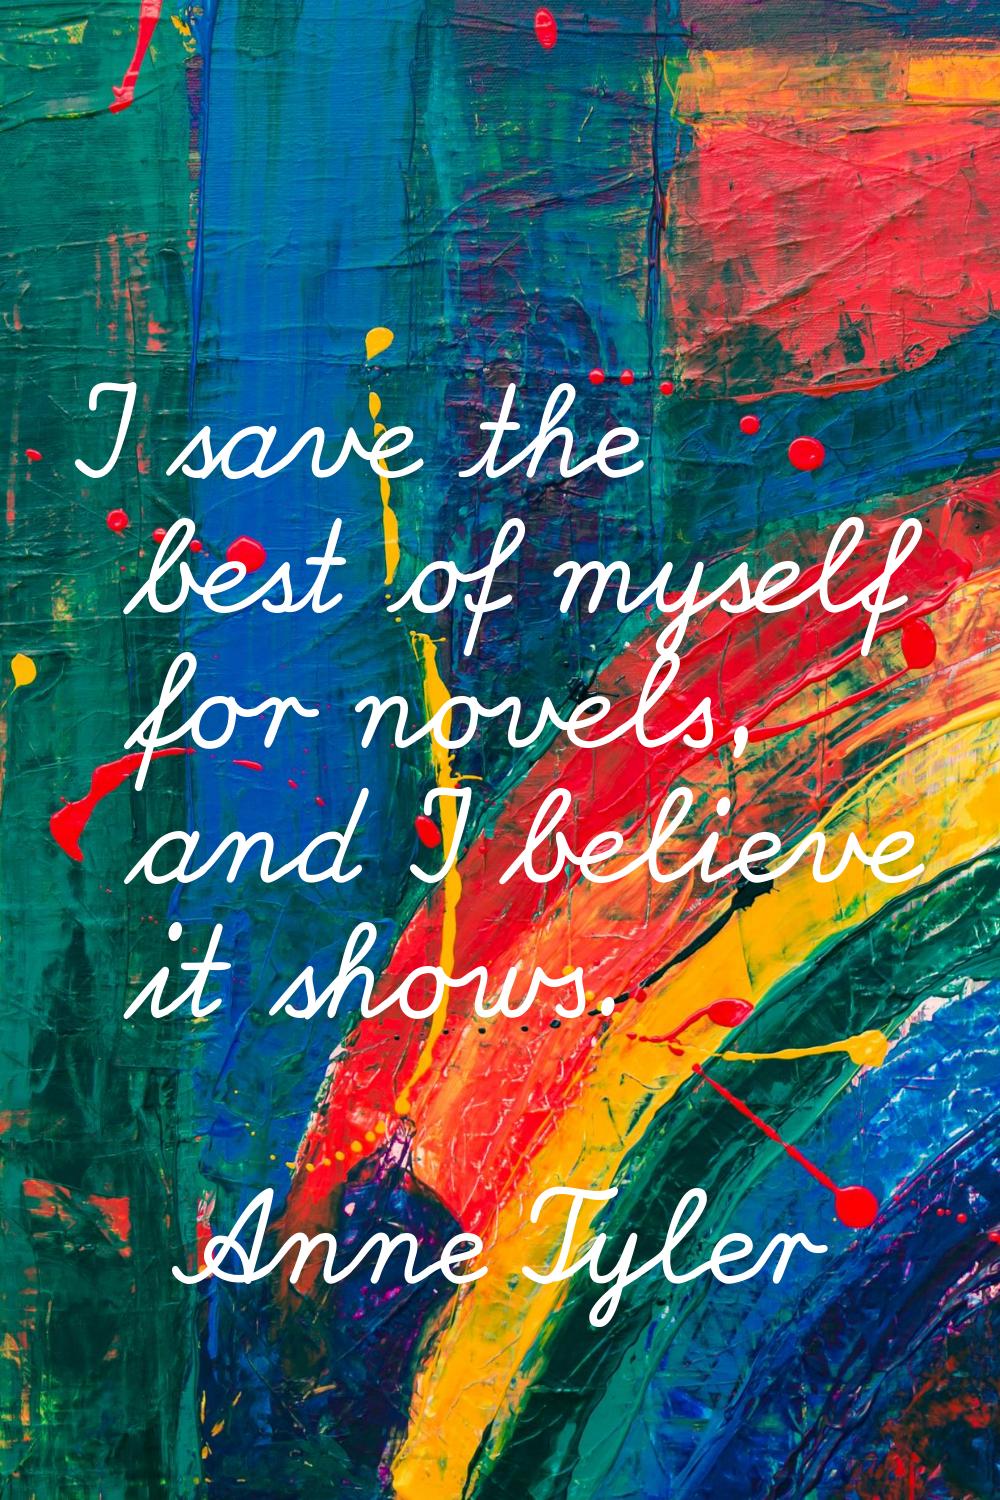 I save the best of myself for novels, and I believe it shows.